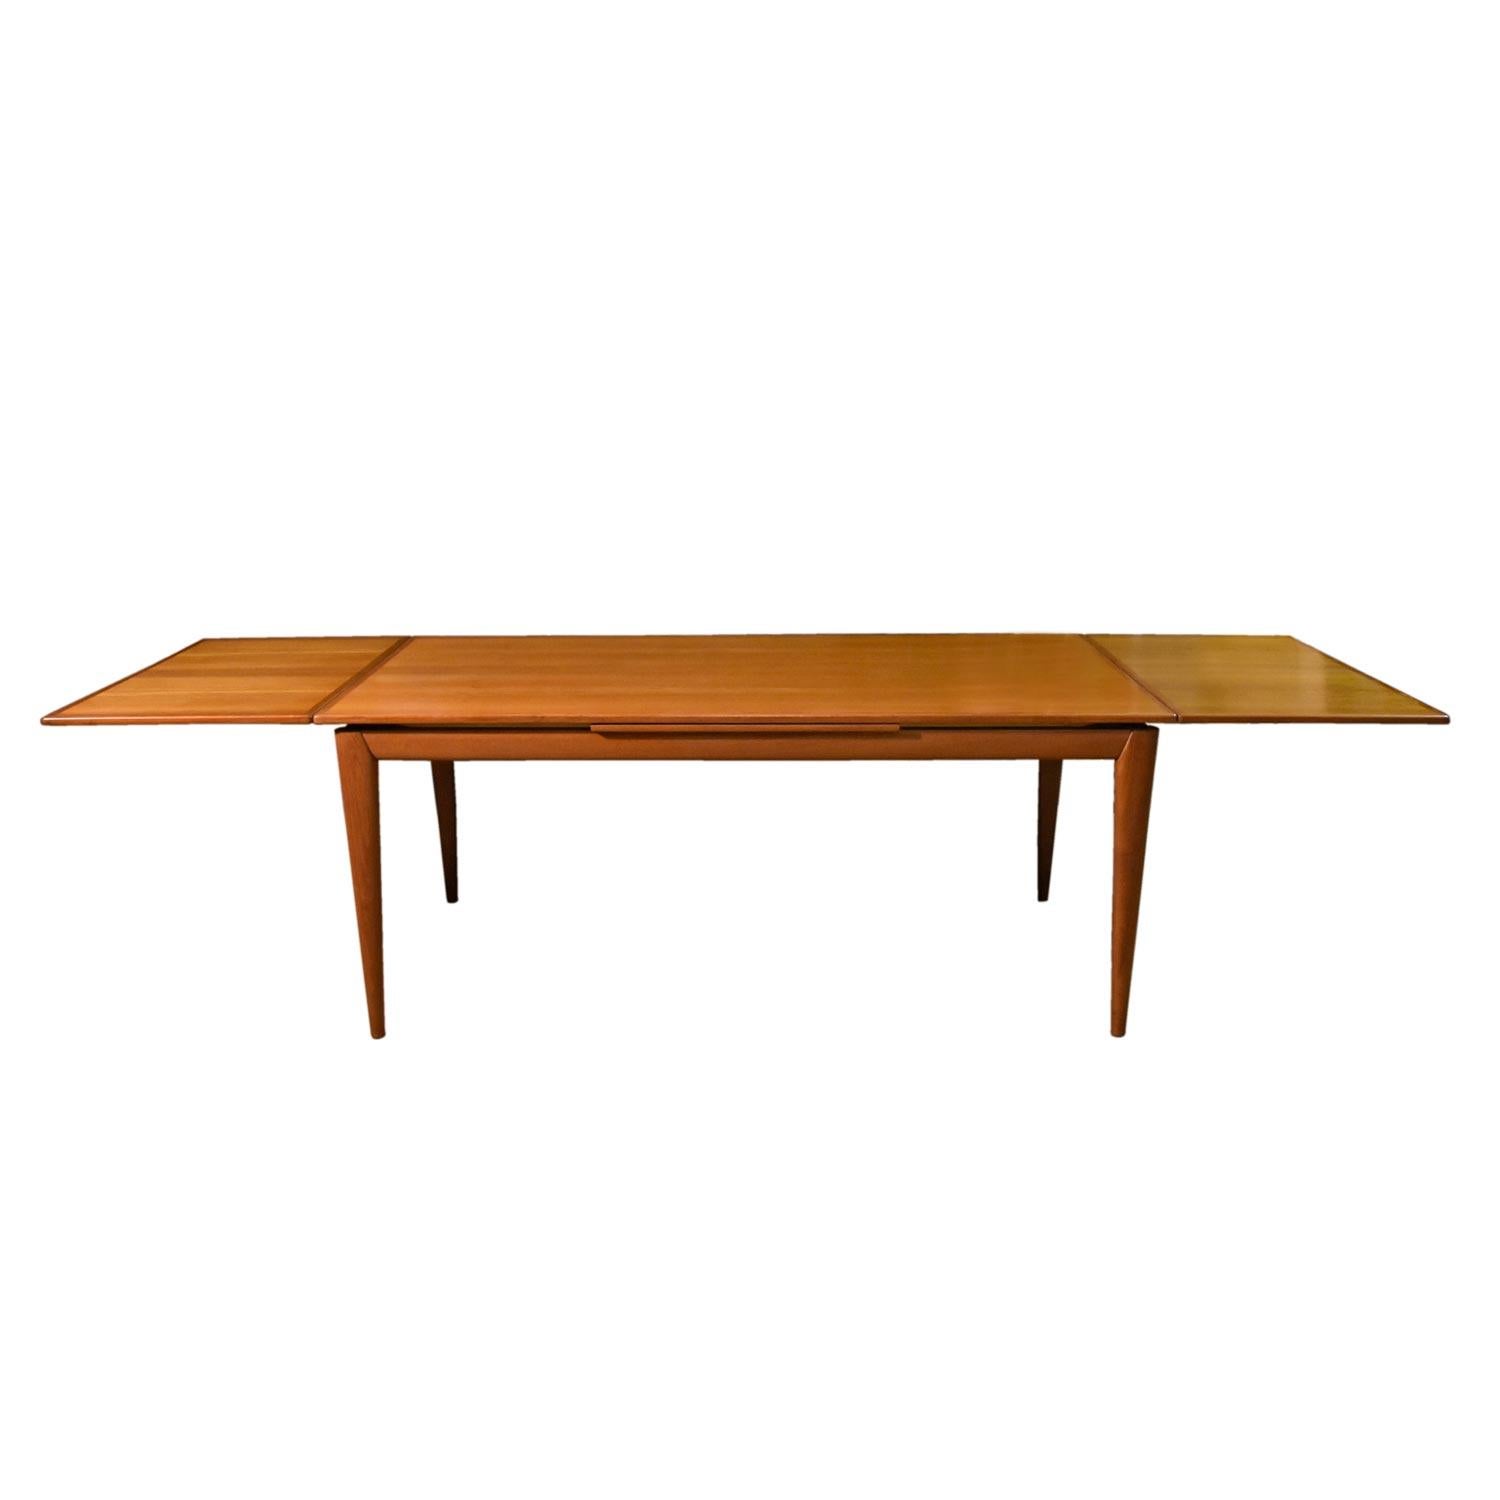 Massive draw leaf Danish teak dining table, circa 1960s. This model is the BIG BOY at just under 10 feet fully extended. Designed by Niels Otto Møller for J.L. Møllers Møbelfabrik, this hefty beauty boasts solid teak tapered legs and gorgeous edge